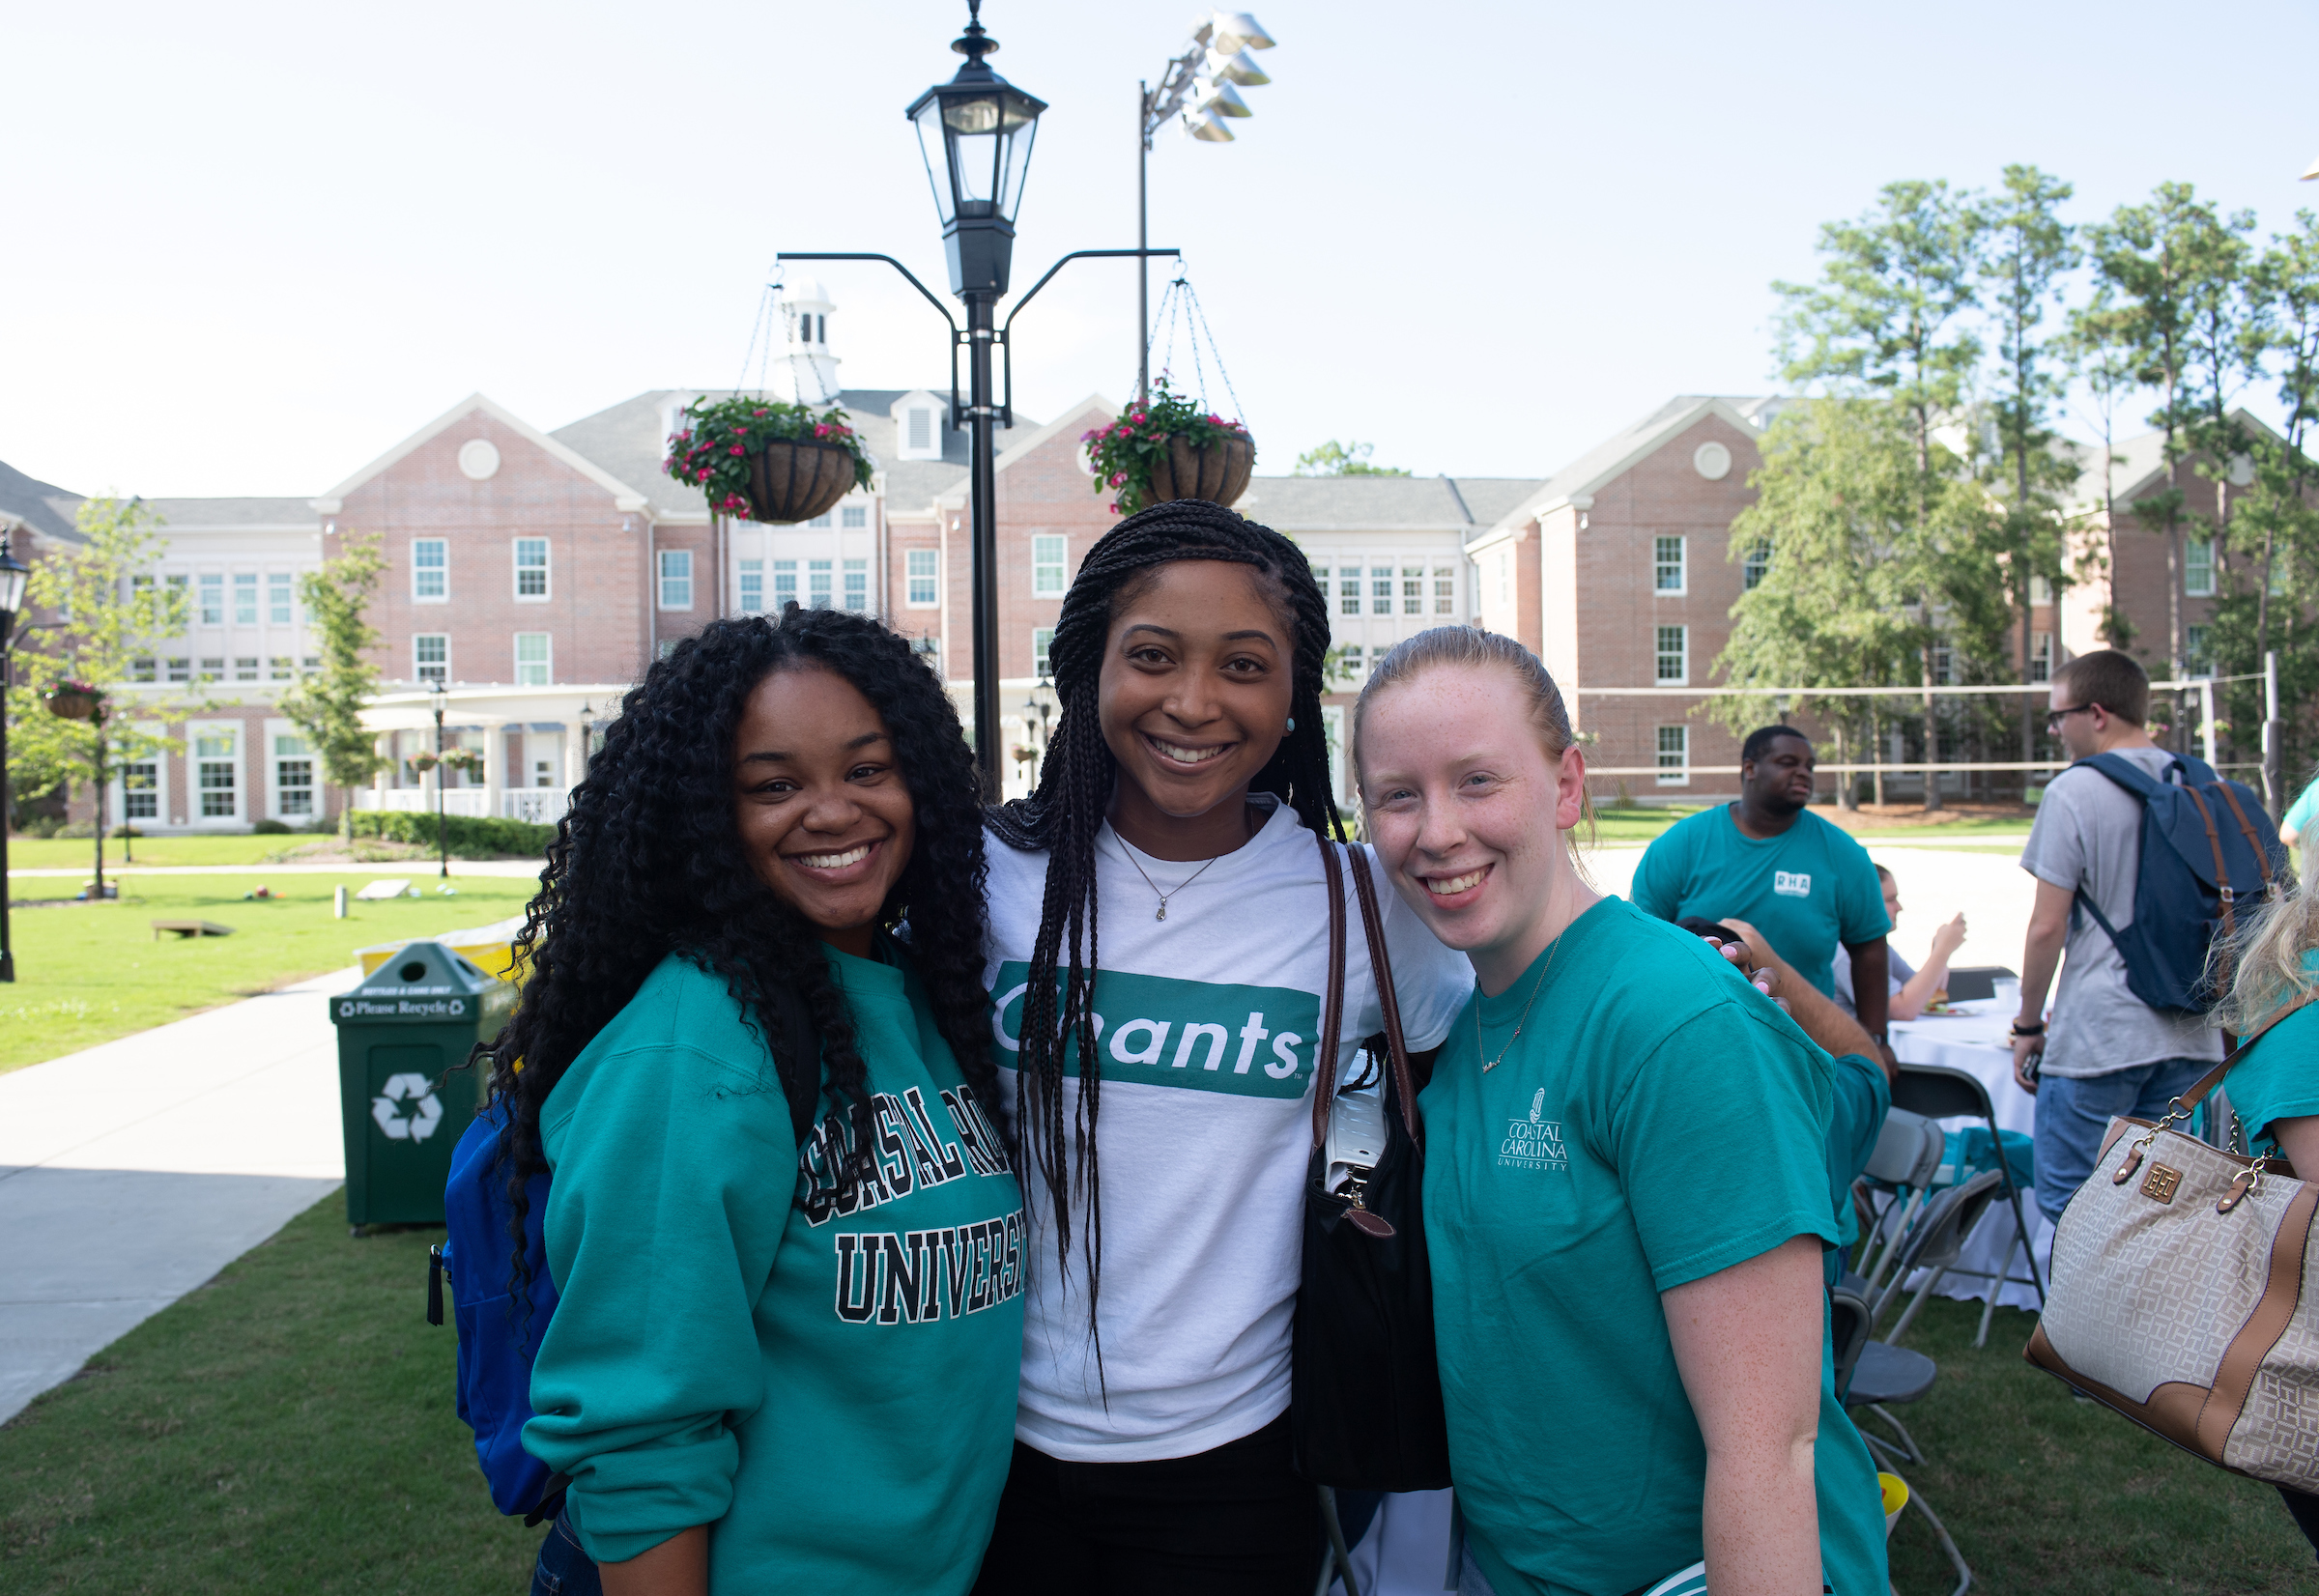 Resident advisers at Coastal Carolina University meet for an annual cookout as part of their training before they welcome 4,600 resident students to campus. The cookout is a chance to build and foster relationships and connections among the staff.